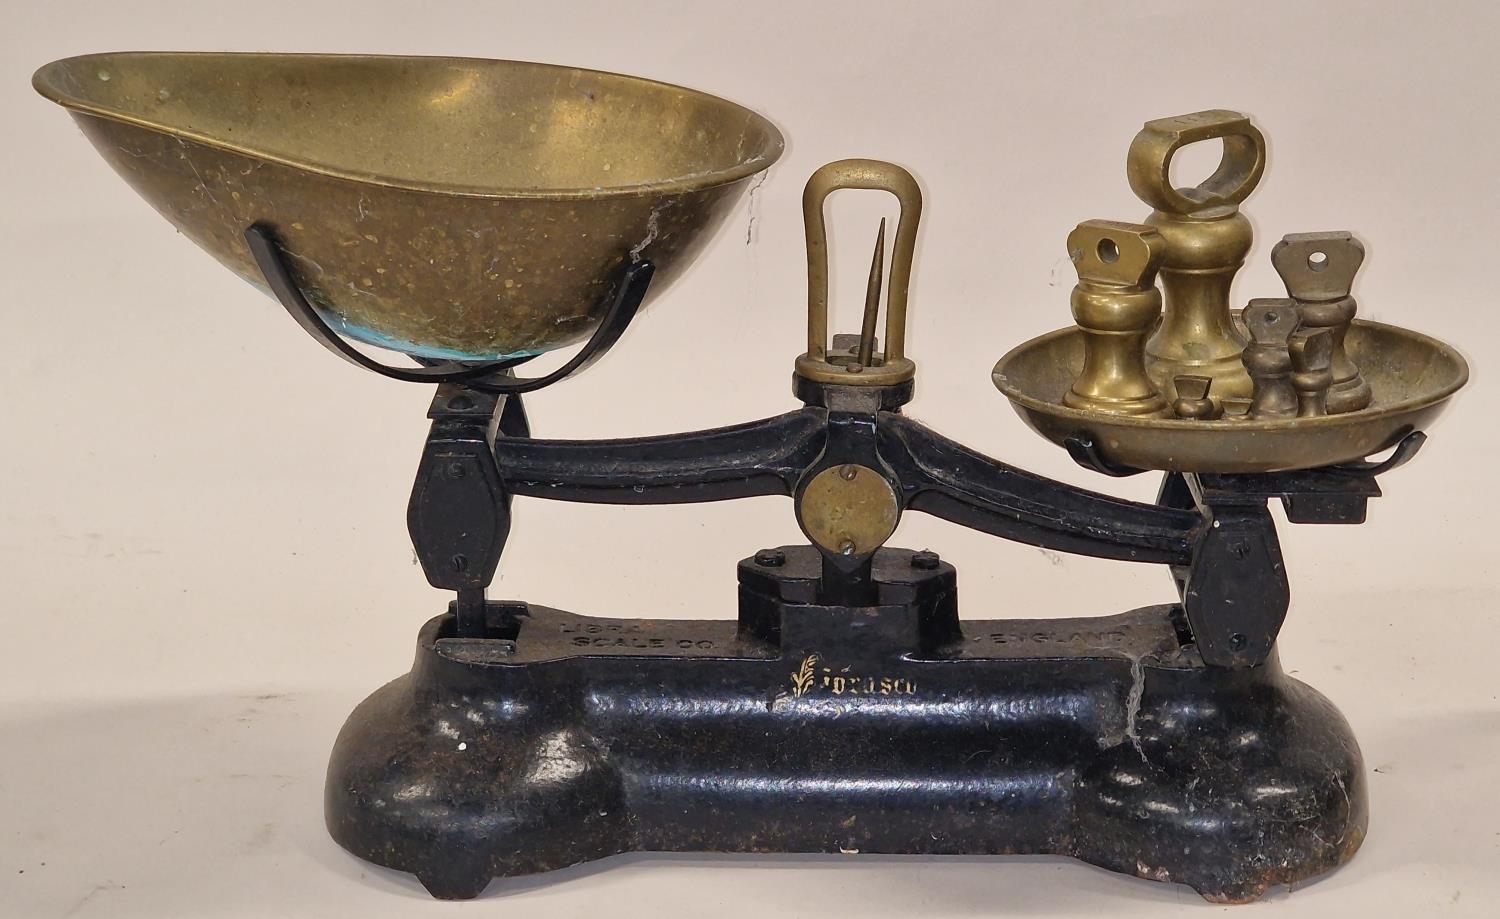 Vintage cast metal set of sweet shop weighing scales to include brass weights.